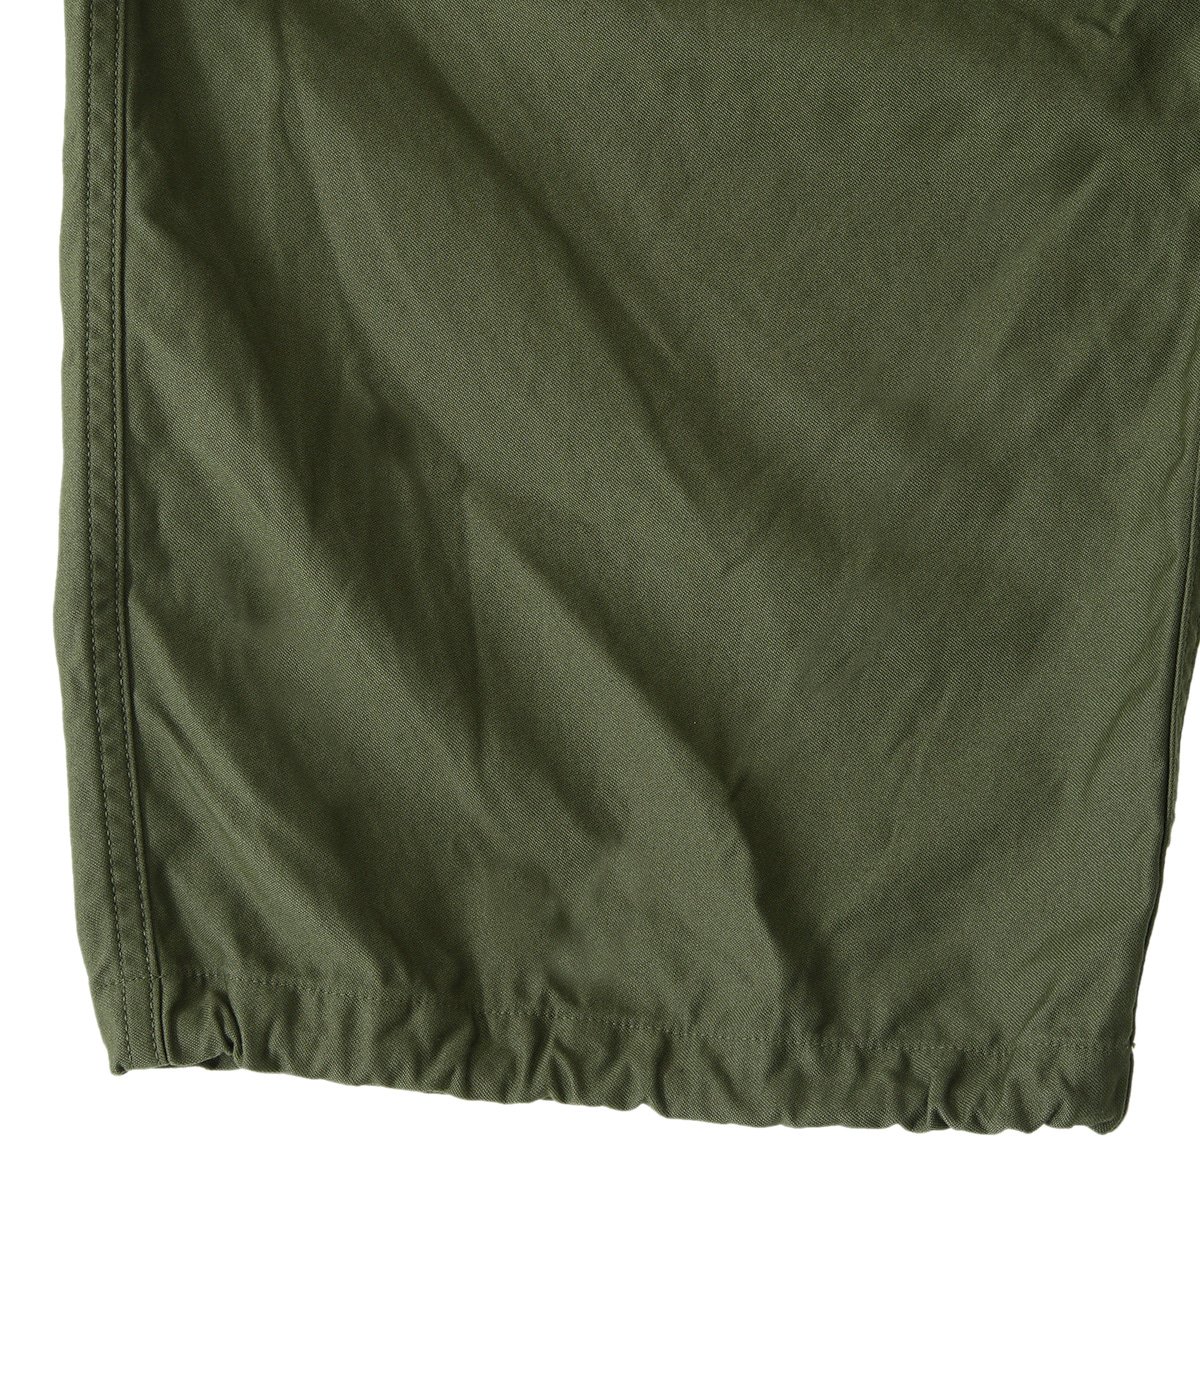 LOOSE FIT ARMY TROUSER